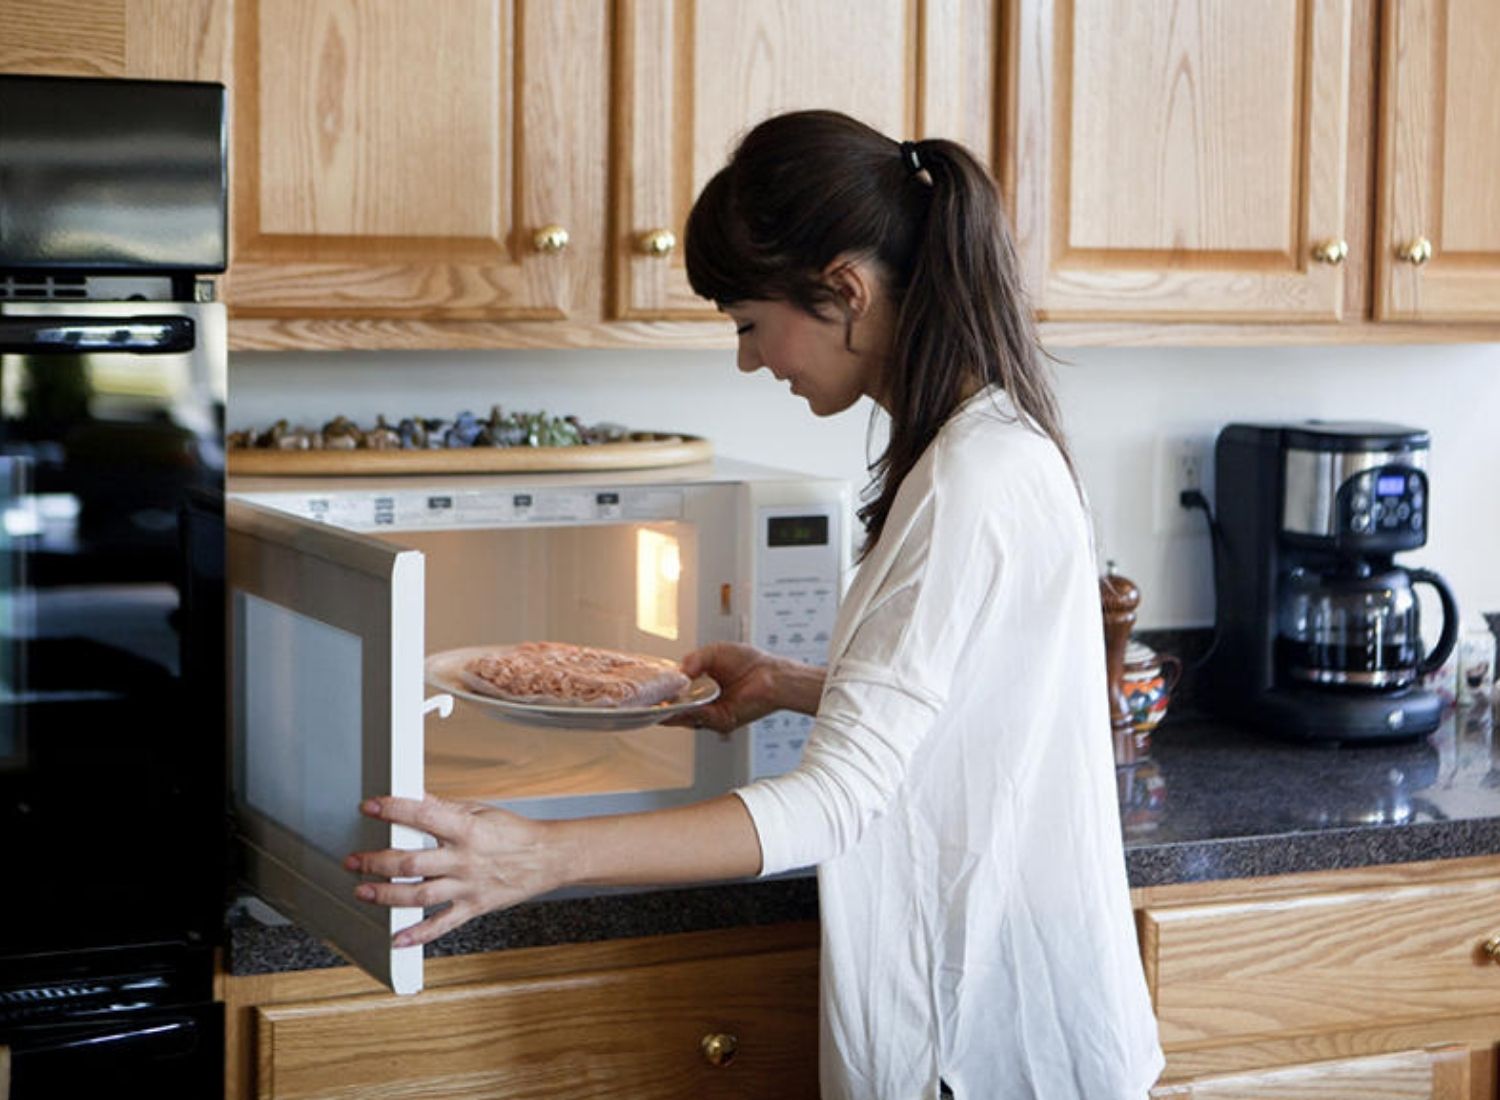 4 Myths And Facts About Microwave Ovens